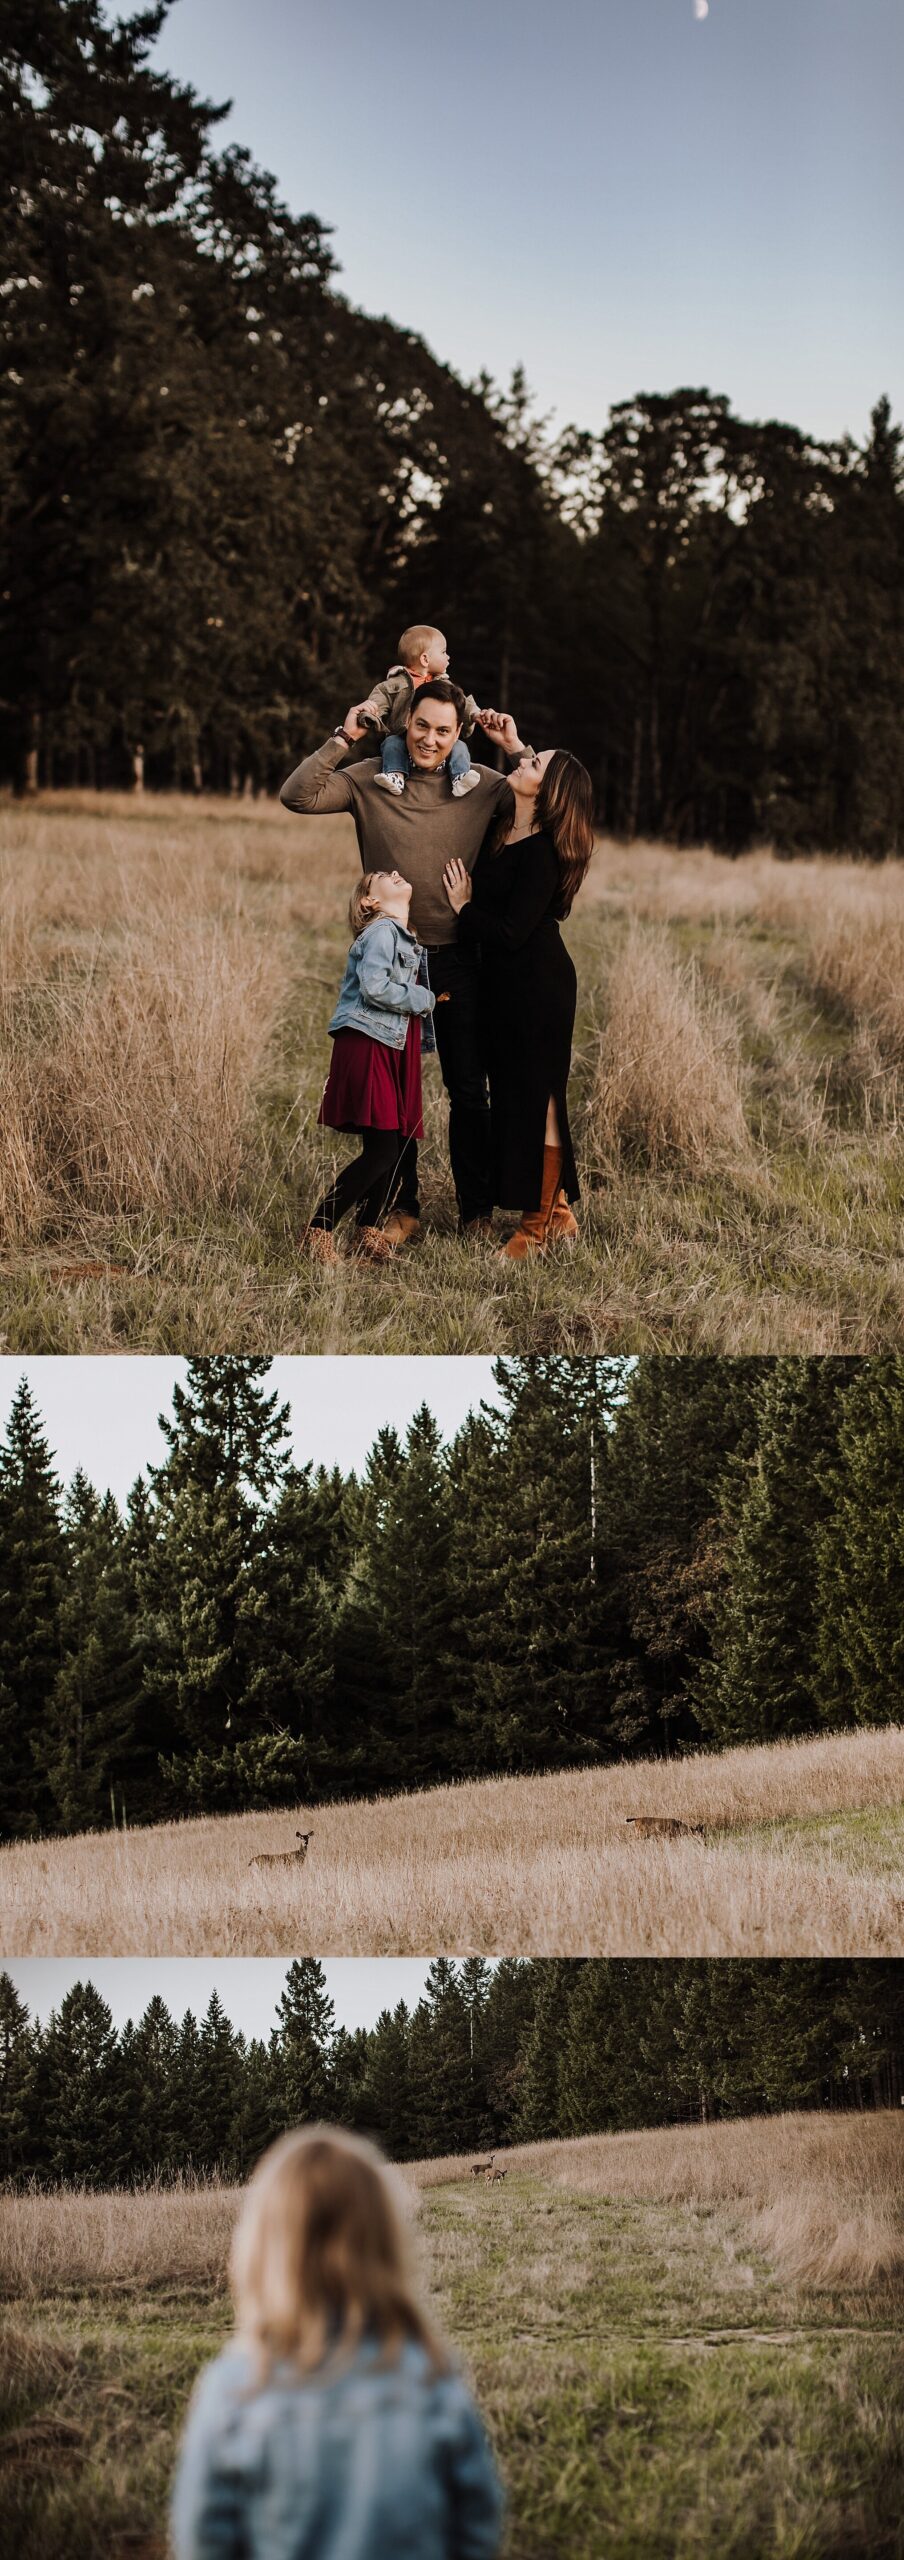 McMinnville Oregon Family Photographer Rustic Bloom Photography (18).jpg